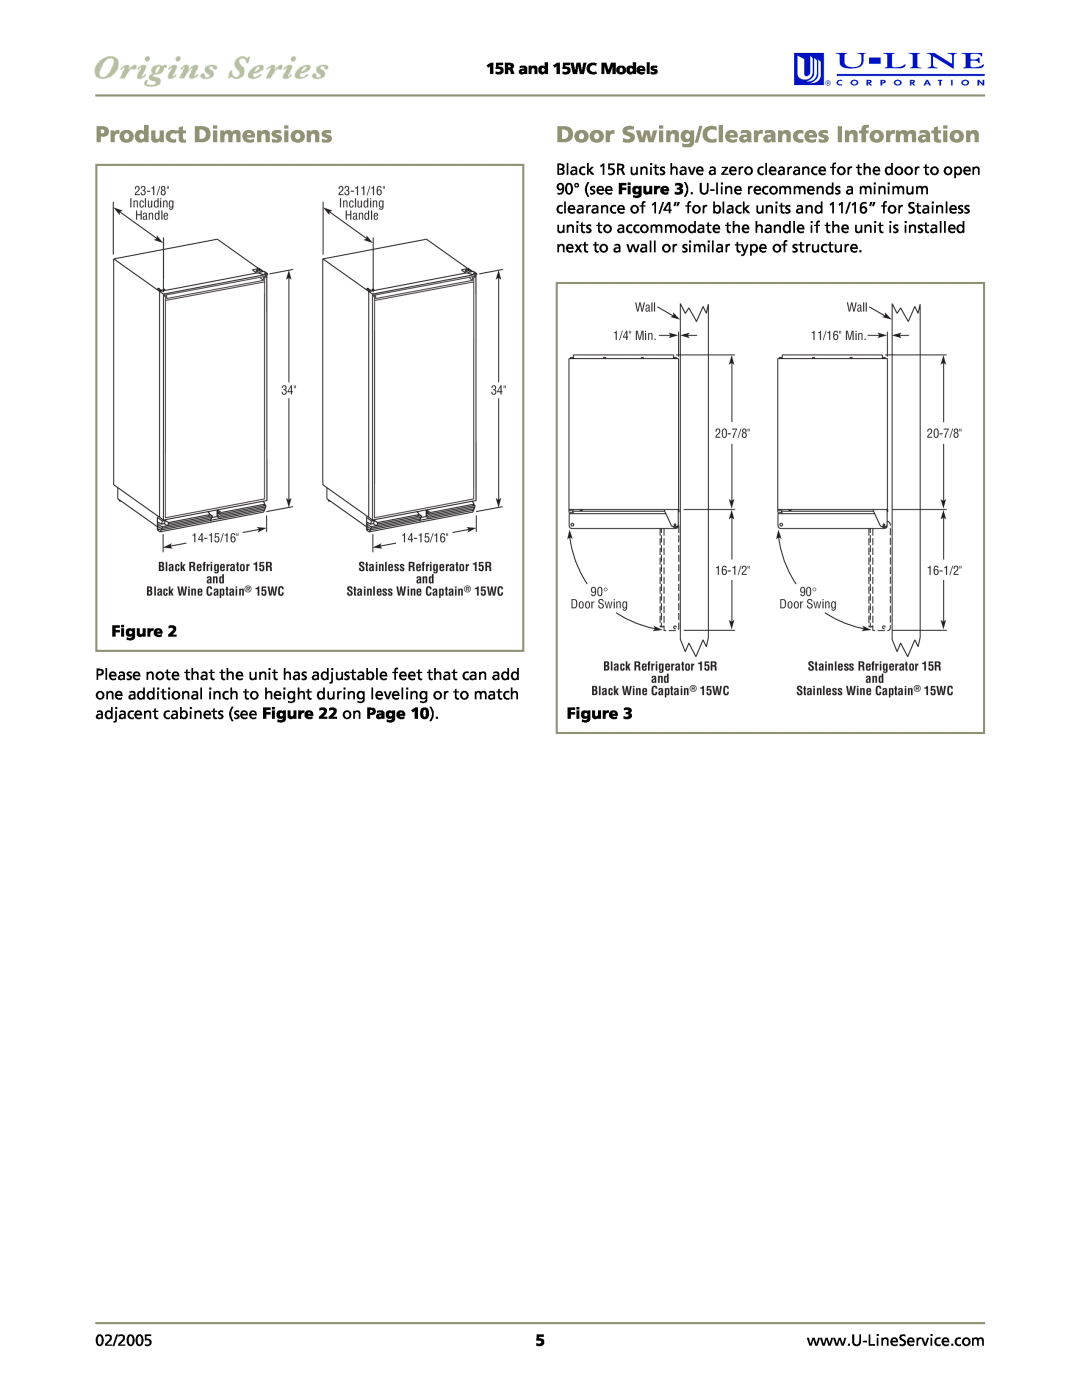 U-Line manual Product Dimensions, Door Swing/Clearances Information, 15R and 15WC Models 